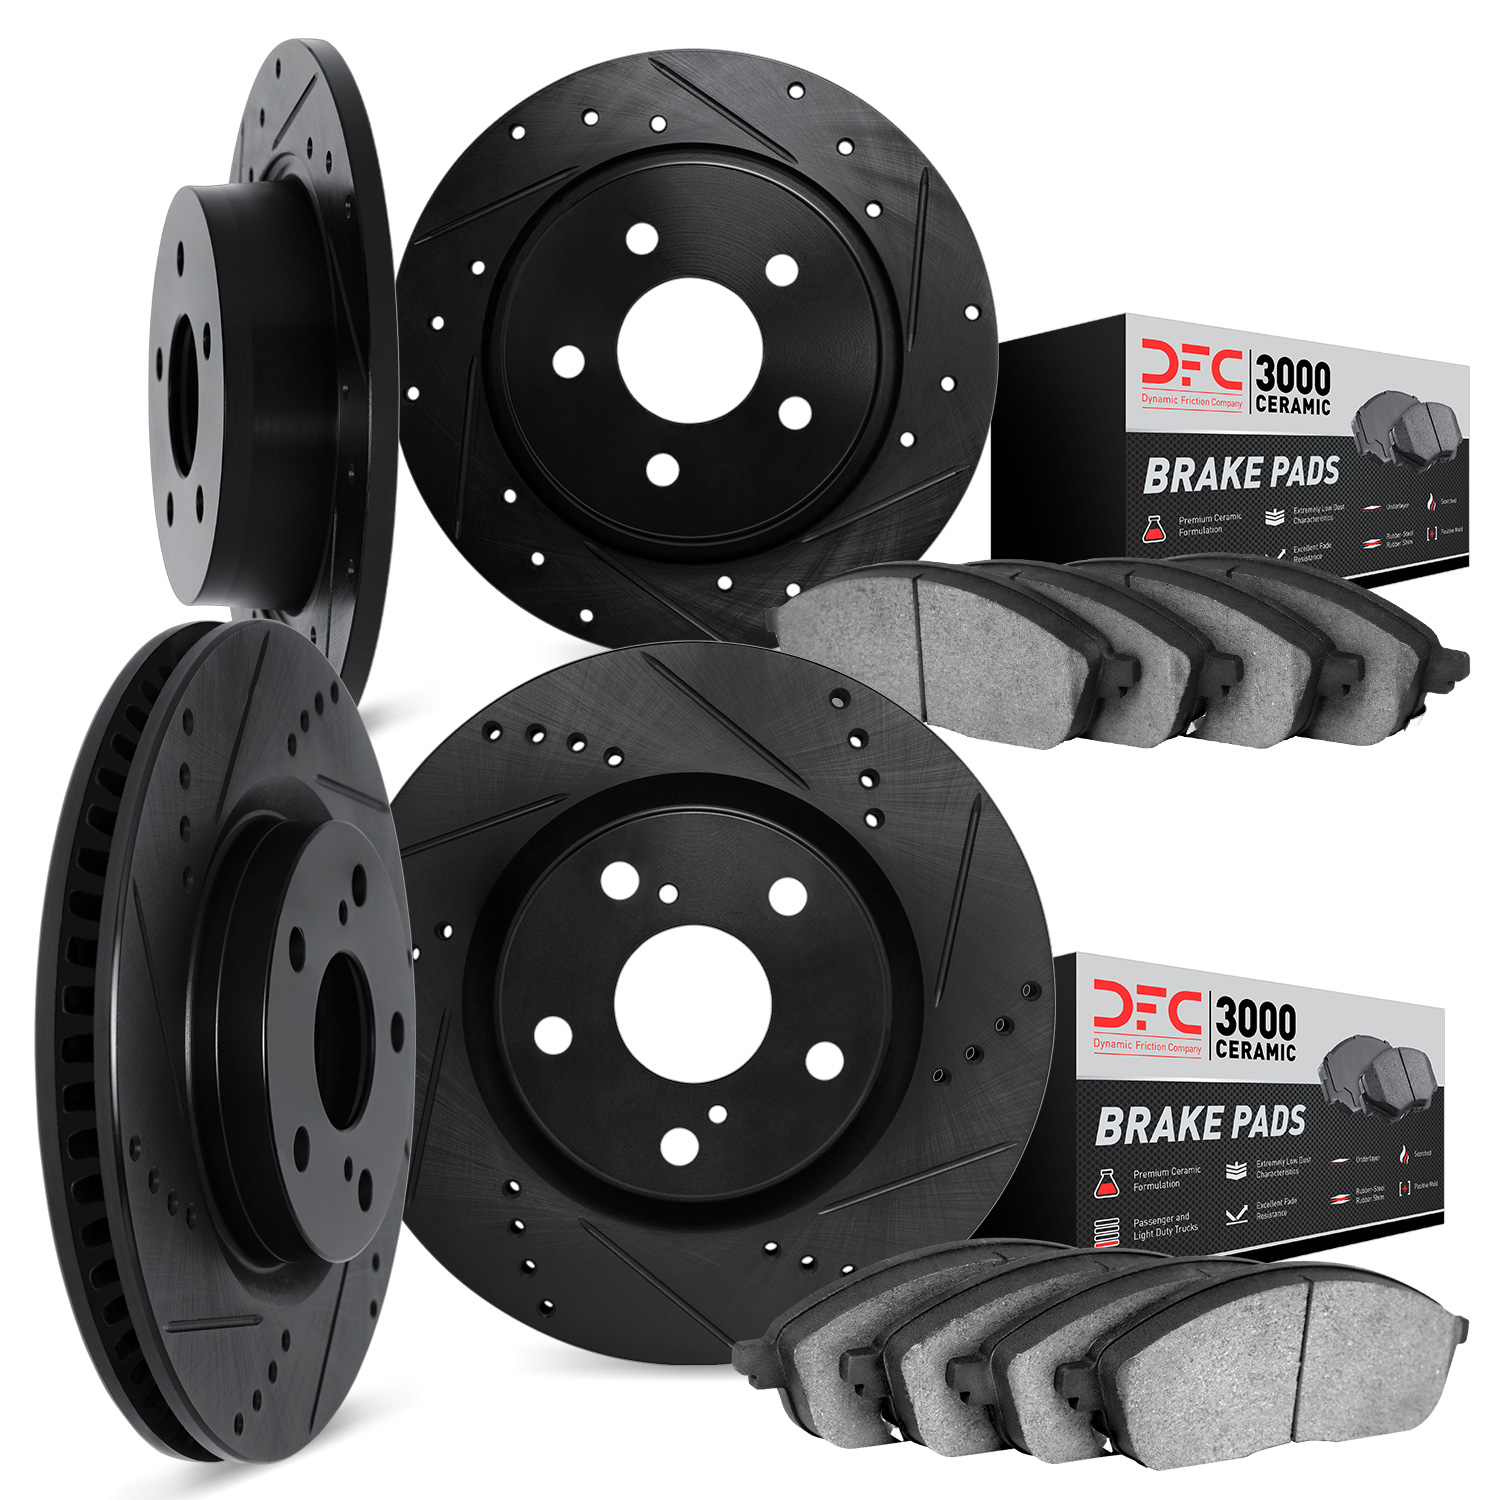 8304-31003 Drilled/Slotted Brake Rotors with 3000-Series Ceramic Brake Pads Kit [Black], 1976-1978 BMW, Position: Front and Rear